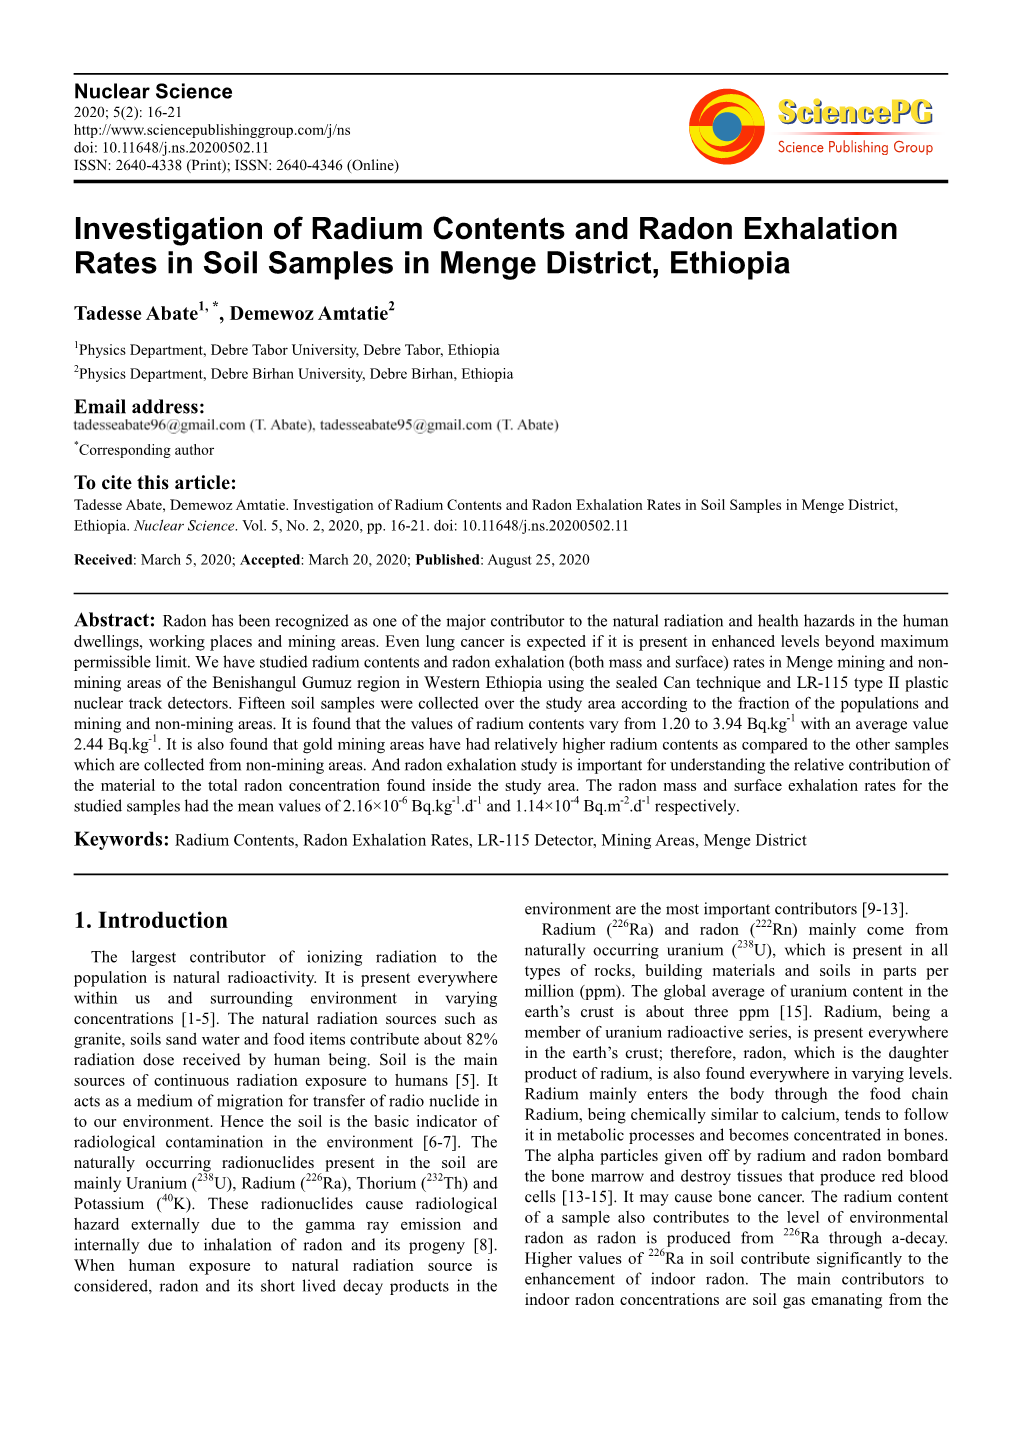 Investigation of Radium Contents and Radon Exhalation Rates in Soil Samples in Menge District, Ethiopia